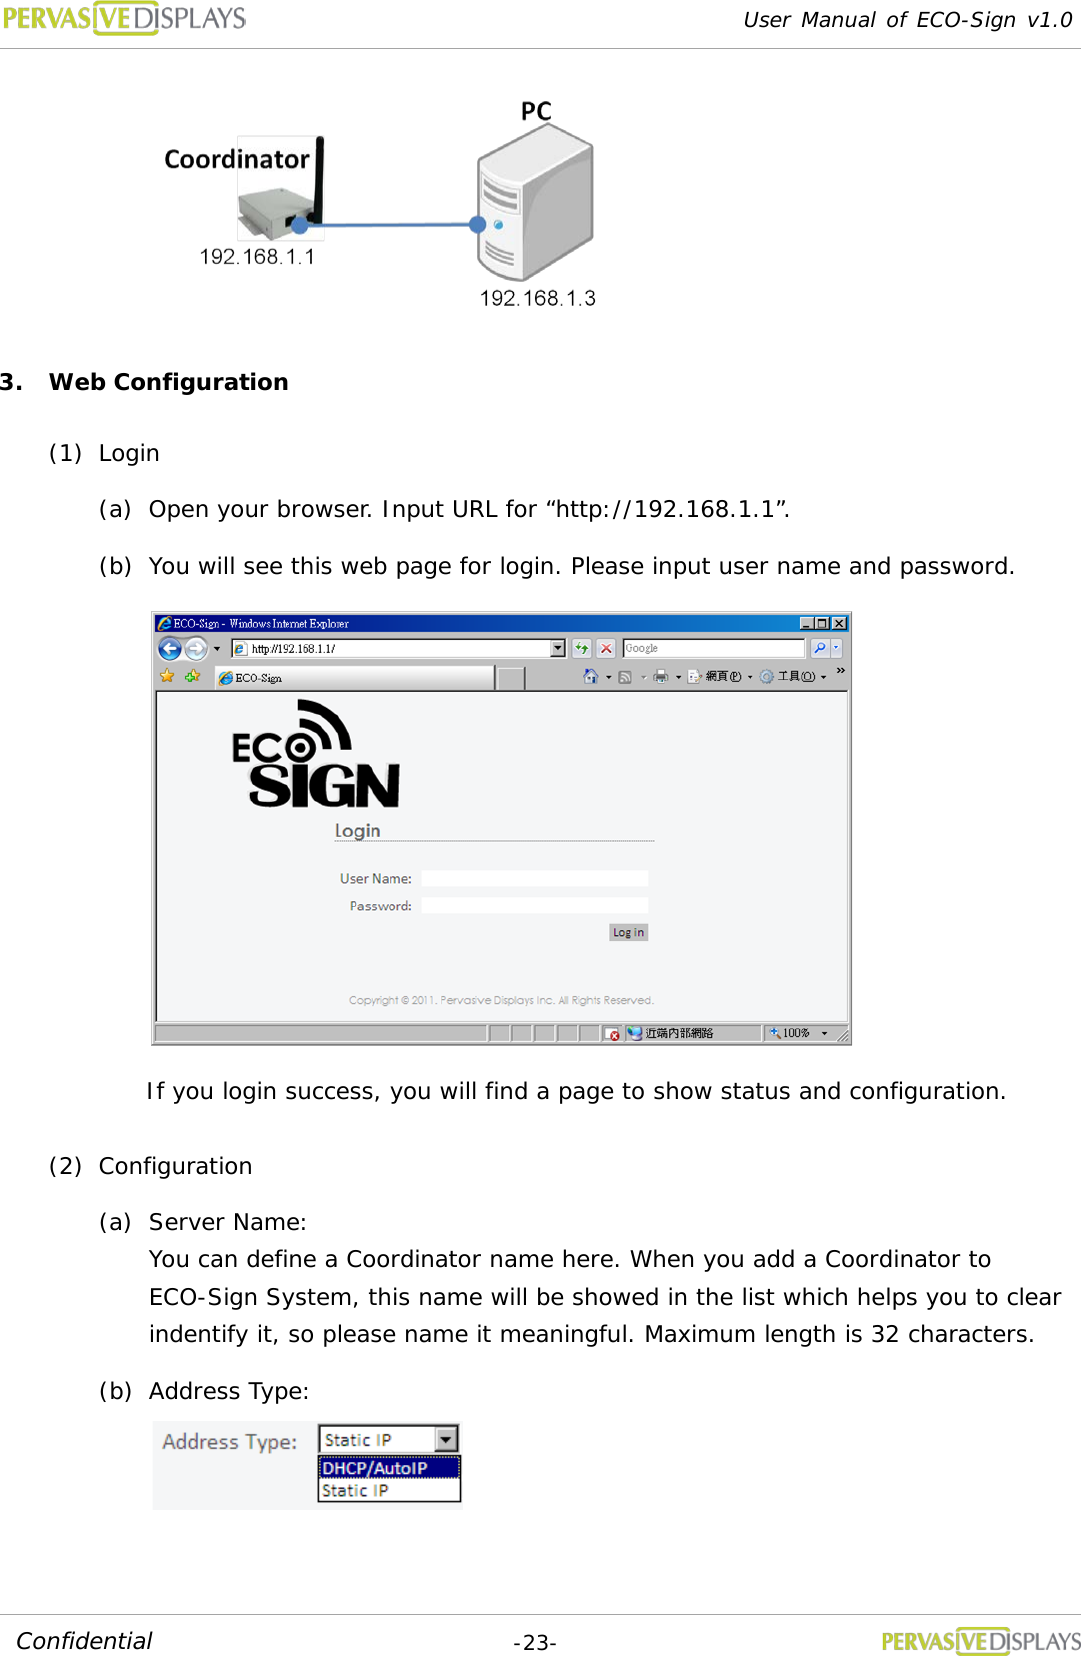 User Manual of ECO-Sign v1.0  -23- Confidential  3. Web Configuration (1) Login (a) Open your browser. Input URL for “http://192.168.1.1”. (b) You will see this web page for login. Please input user name and password.  If you login success, you will find a page to show status and configuration. (2) Configuration (a) Server Name:  You can define a Coordinator name here. When you add a Coordinator to ECO-Sign System, this name will be showed in the list which helps you to clear indentify it, so please name it meaningful. Maximum length is 32 characters. (b) Address Type:   